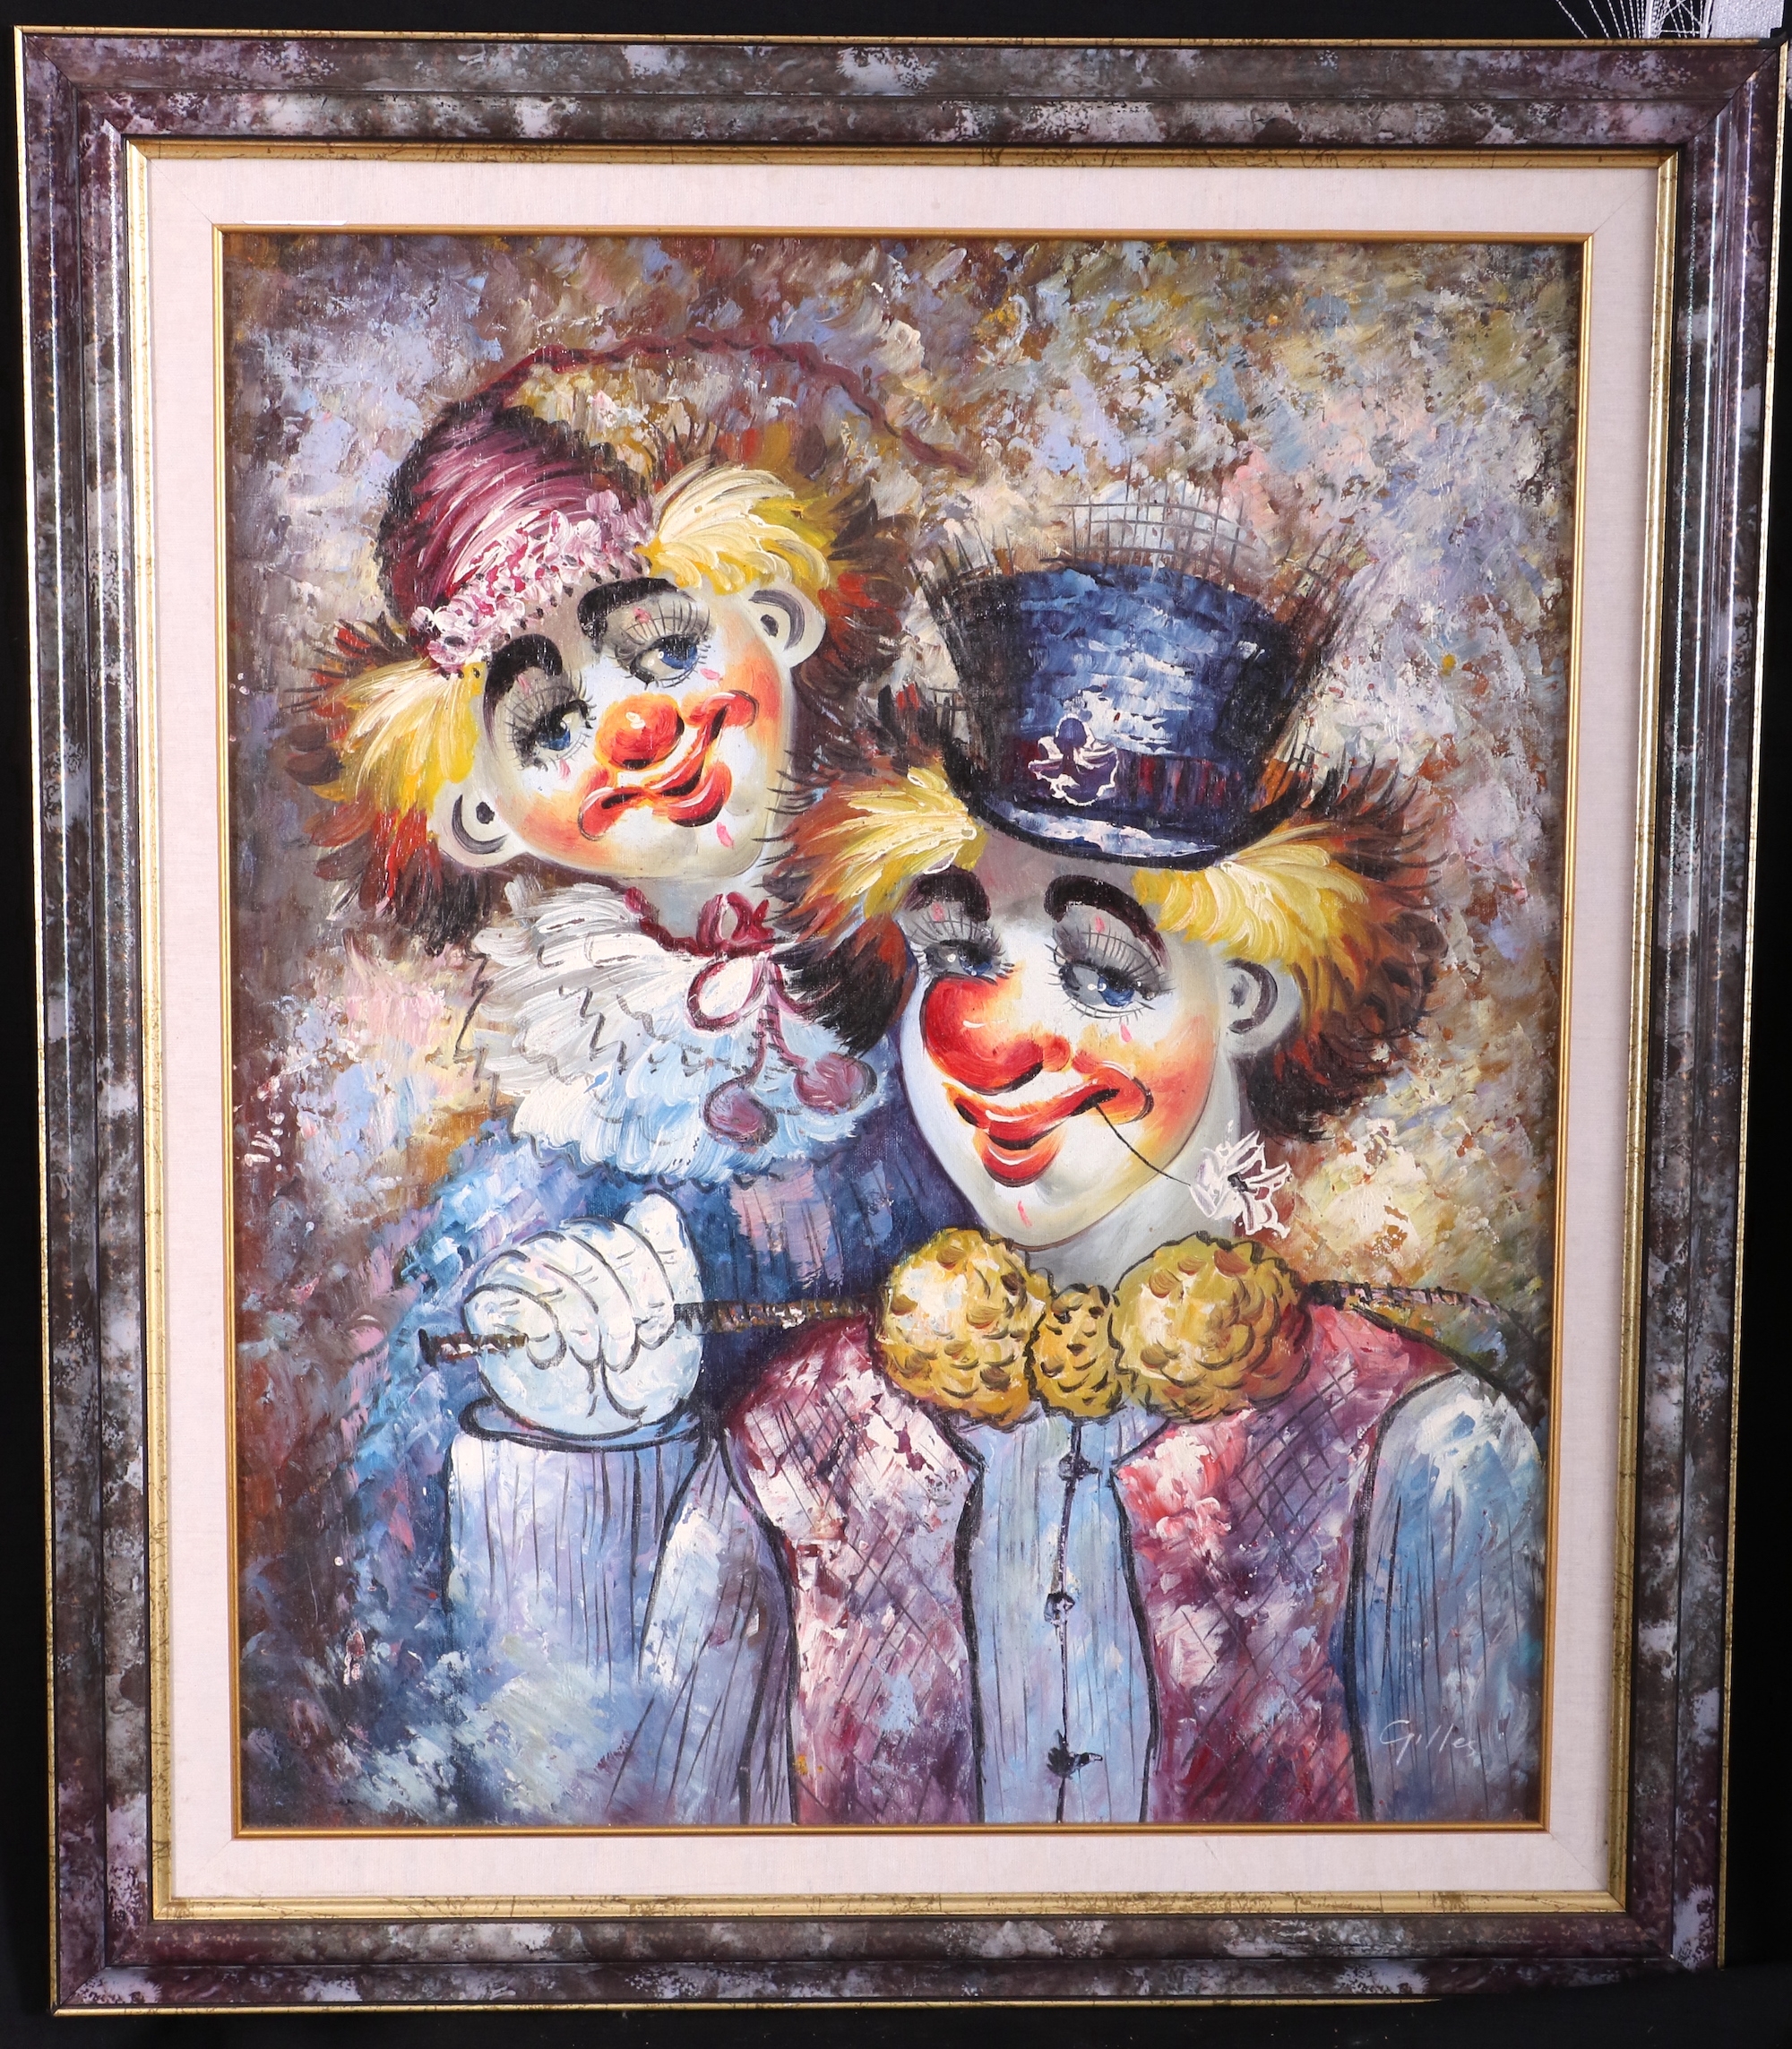 Artwork by Gilles Baise, TWO CLOWNS, Made of oil on canvas on board